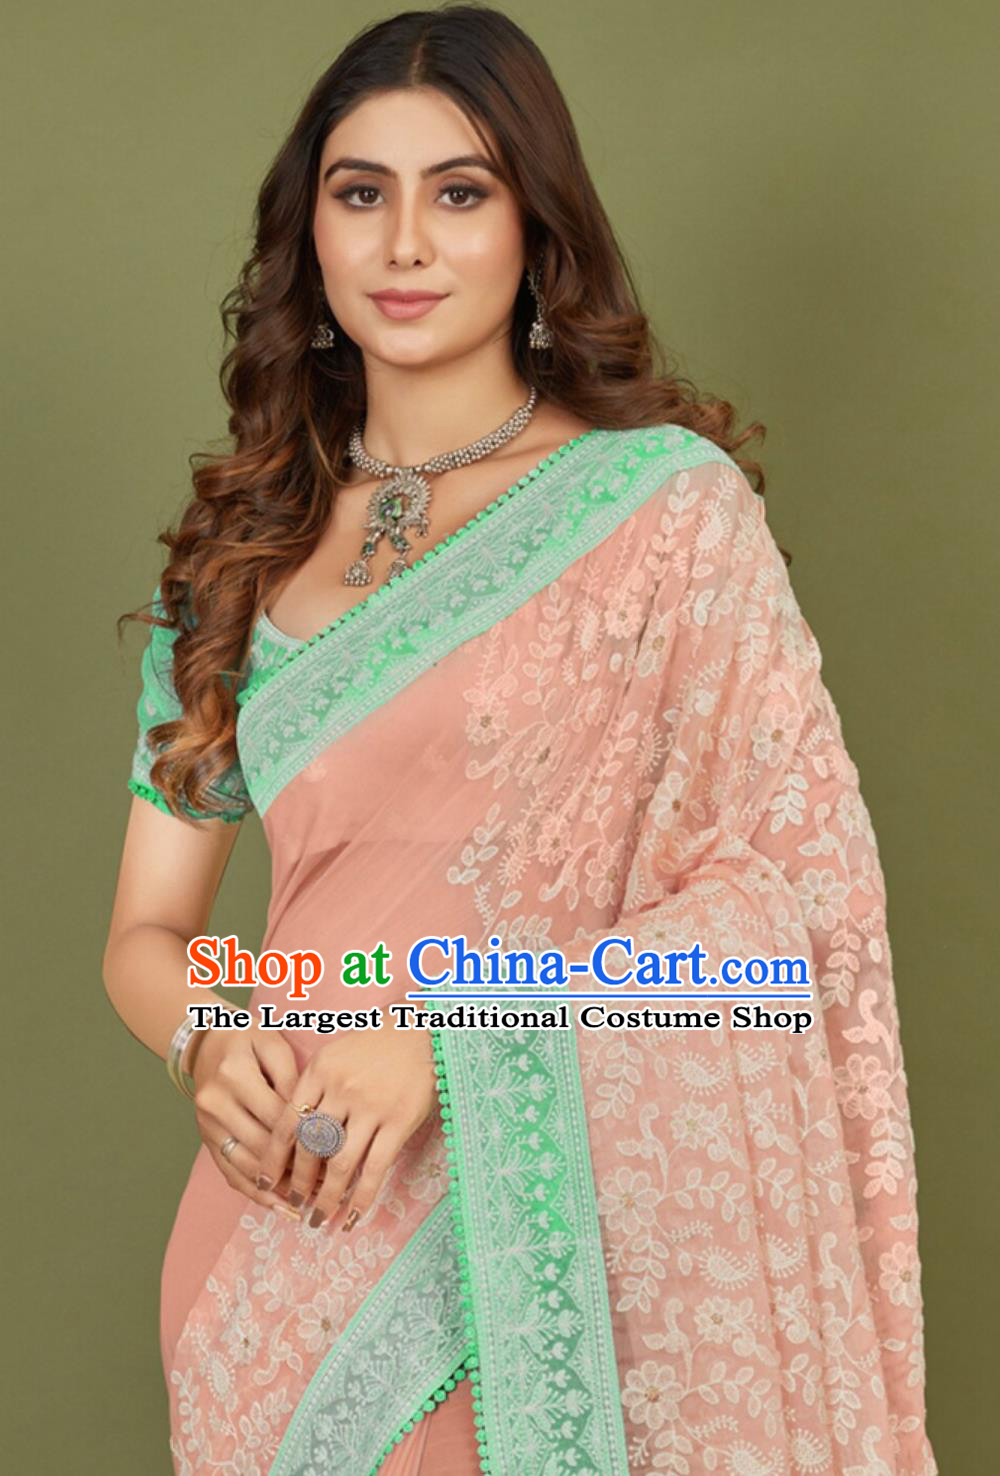 Traditional Festival Peach Pink Embroidered Sari Dress India Woman Summer Costume Indian National Clothing